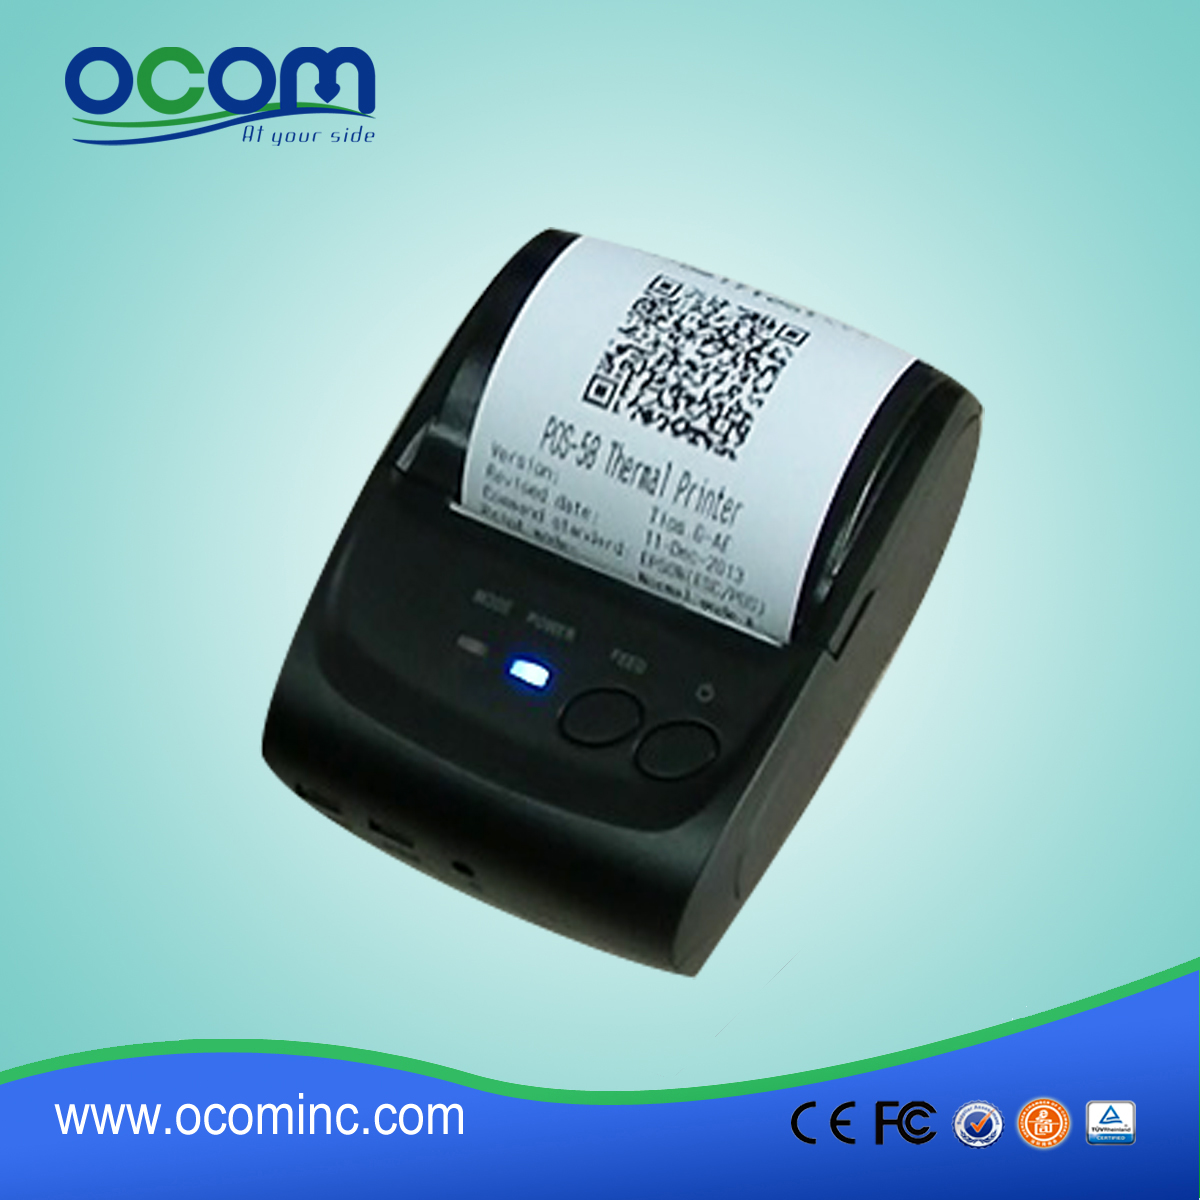 Android bluetooth mobile thermal printer (OCPP-M05)